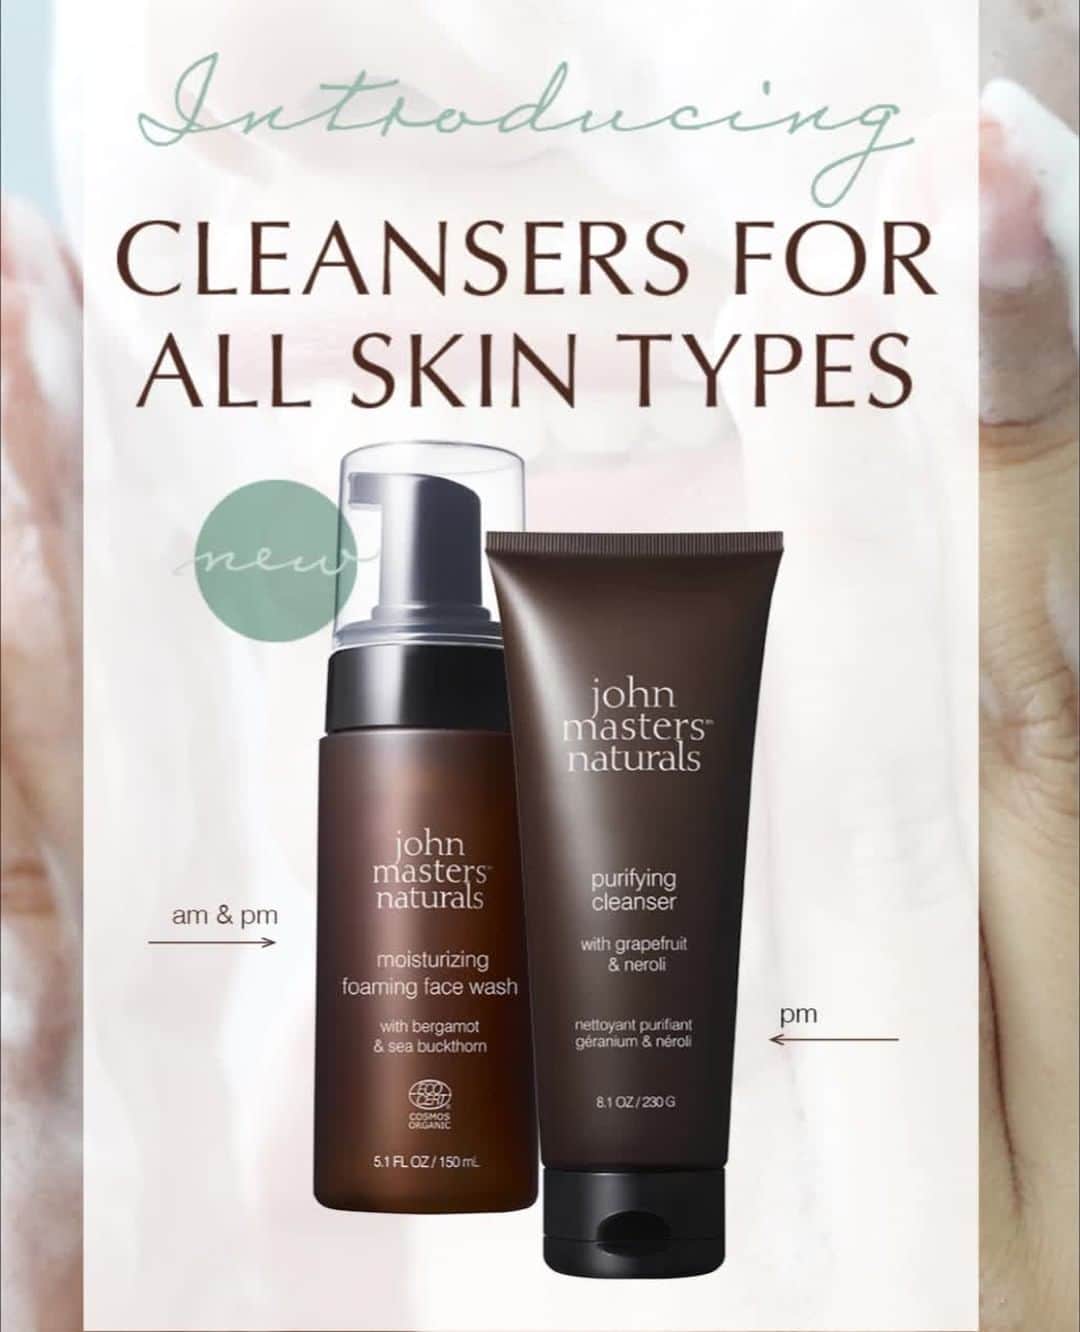 John Masters Organicsのインスタグラム：「Introducing NEW Cleansers! ⁠ ⁠ Moisturizing Foaming Face Wash 💧⁠ - Who: Normal, Dry, & Sensitive Skin Types⁠ - What: A daily foaming face wash that cleanses pores, brightens skin, and helps retain moisture levels. It’s not drying or striping & helps balance the skin.⁠ - When: Daily AM & PM⁠ - Key ingredients: Bergamot oil helps clarify & unclog pores and sea buckthorn moisturizes dry skin & calms sensitive areas.⁠ ⁠ Purifying Cleanser 🍊⁠ - Who: Oily, Combination, Acne Prone, & Mature Skin Types⁠ - What: A purifying face cleanser that removes make-up & unclogs pores. A silky gel to milk formula that pulls impurities from the skin while softening texture.⁠ - When: Daily PM⁠ - Key ingredients: Grapefruit is rich in vitamin c and stimulates the production of collagen to soften & brighten the skin. Neroli has anti-scaring properties to help fade acne spots and works to reduce redness.⁠ ⁠ Click Link in Bio to Shop!」